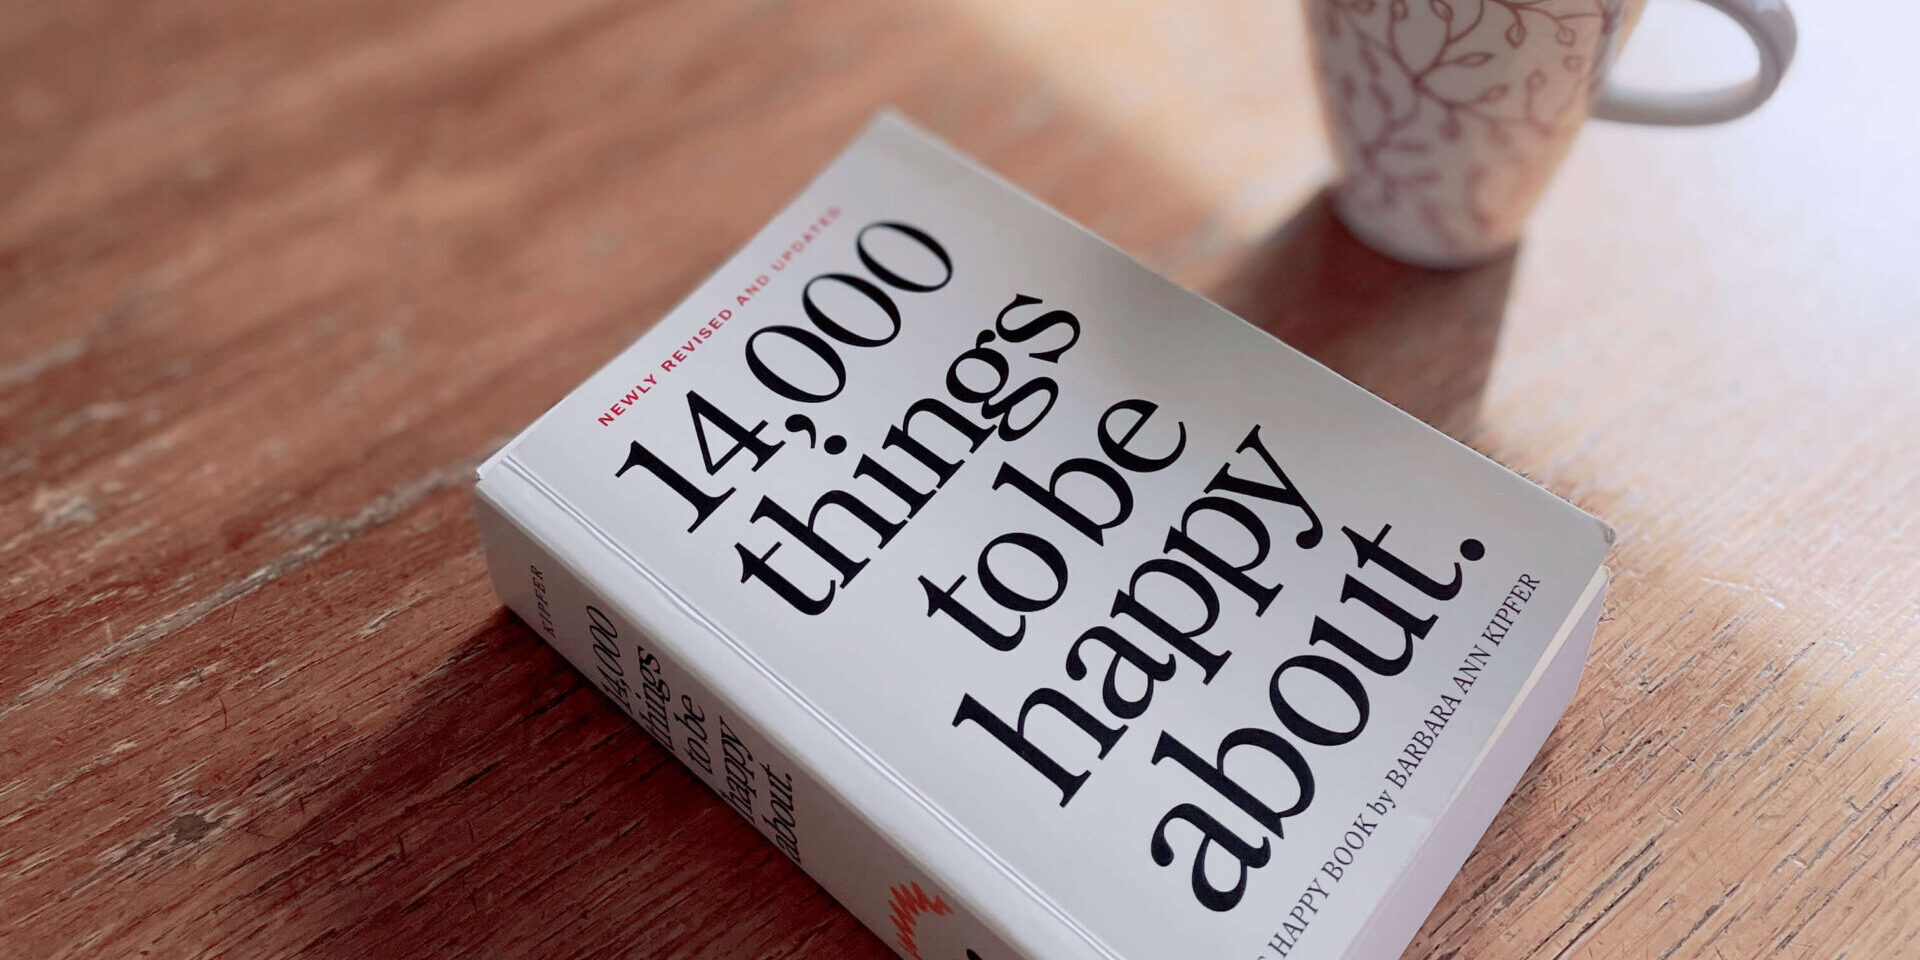 「14000 things to be happy about」 （Barbara Ann Kipfer（バーバラ・アン・キプファー）著）